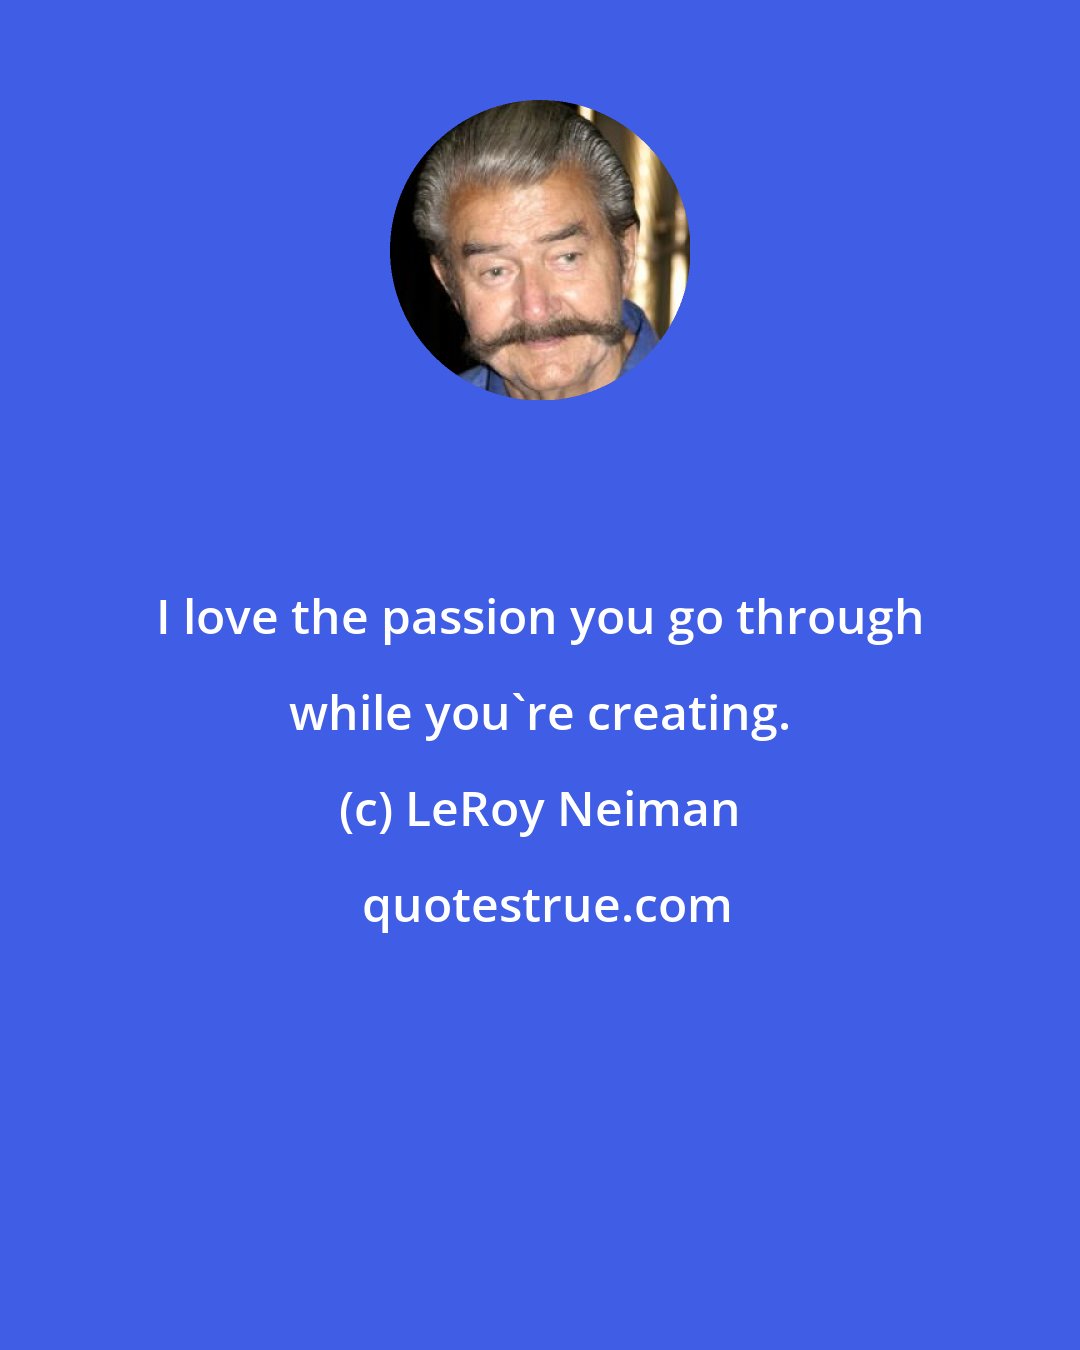 LeRoy Neiman: I love the passion you go through while you're creating.